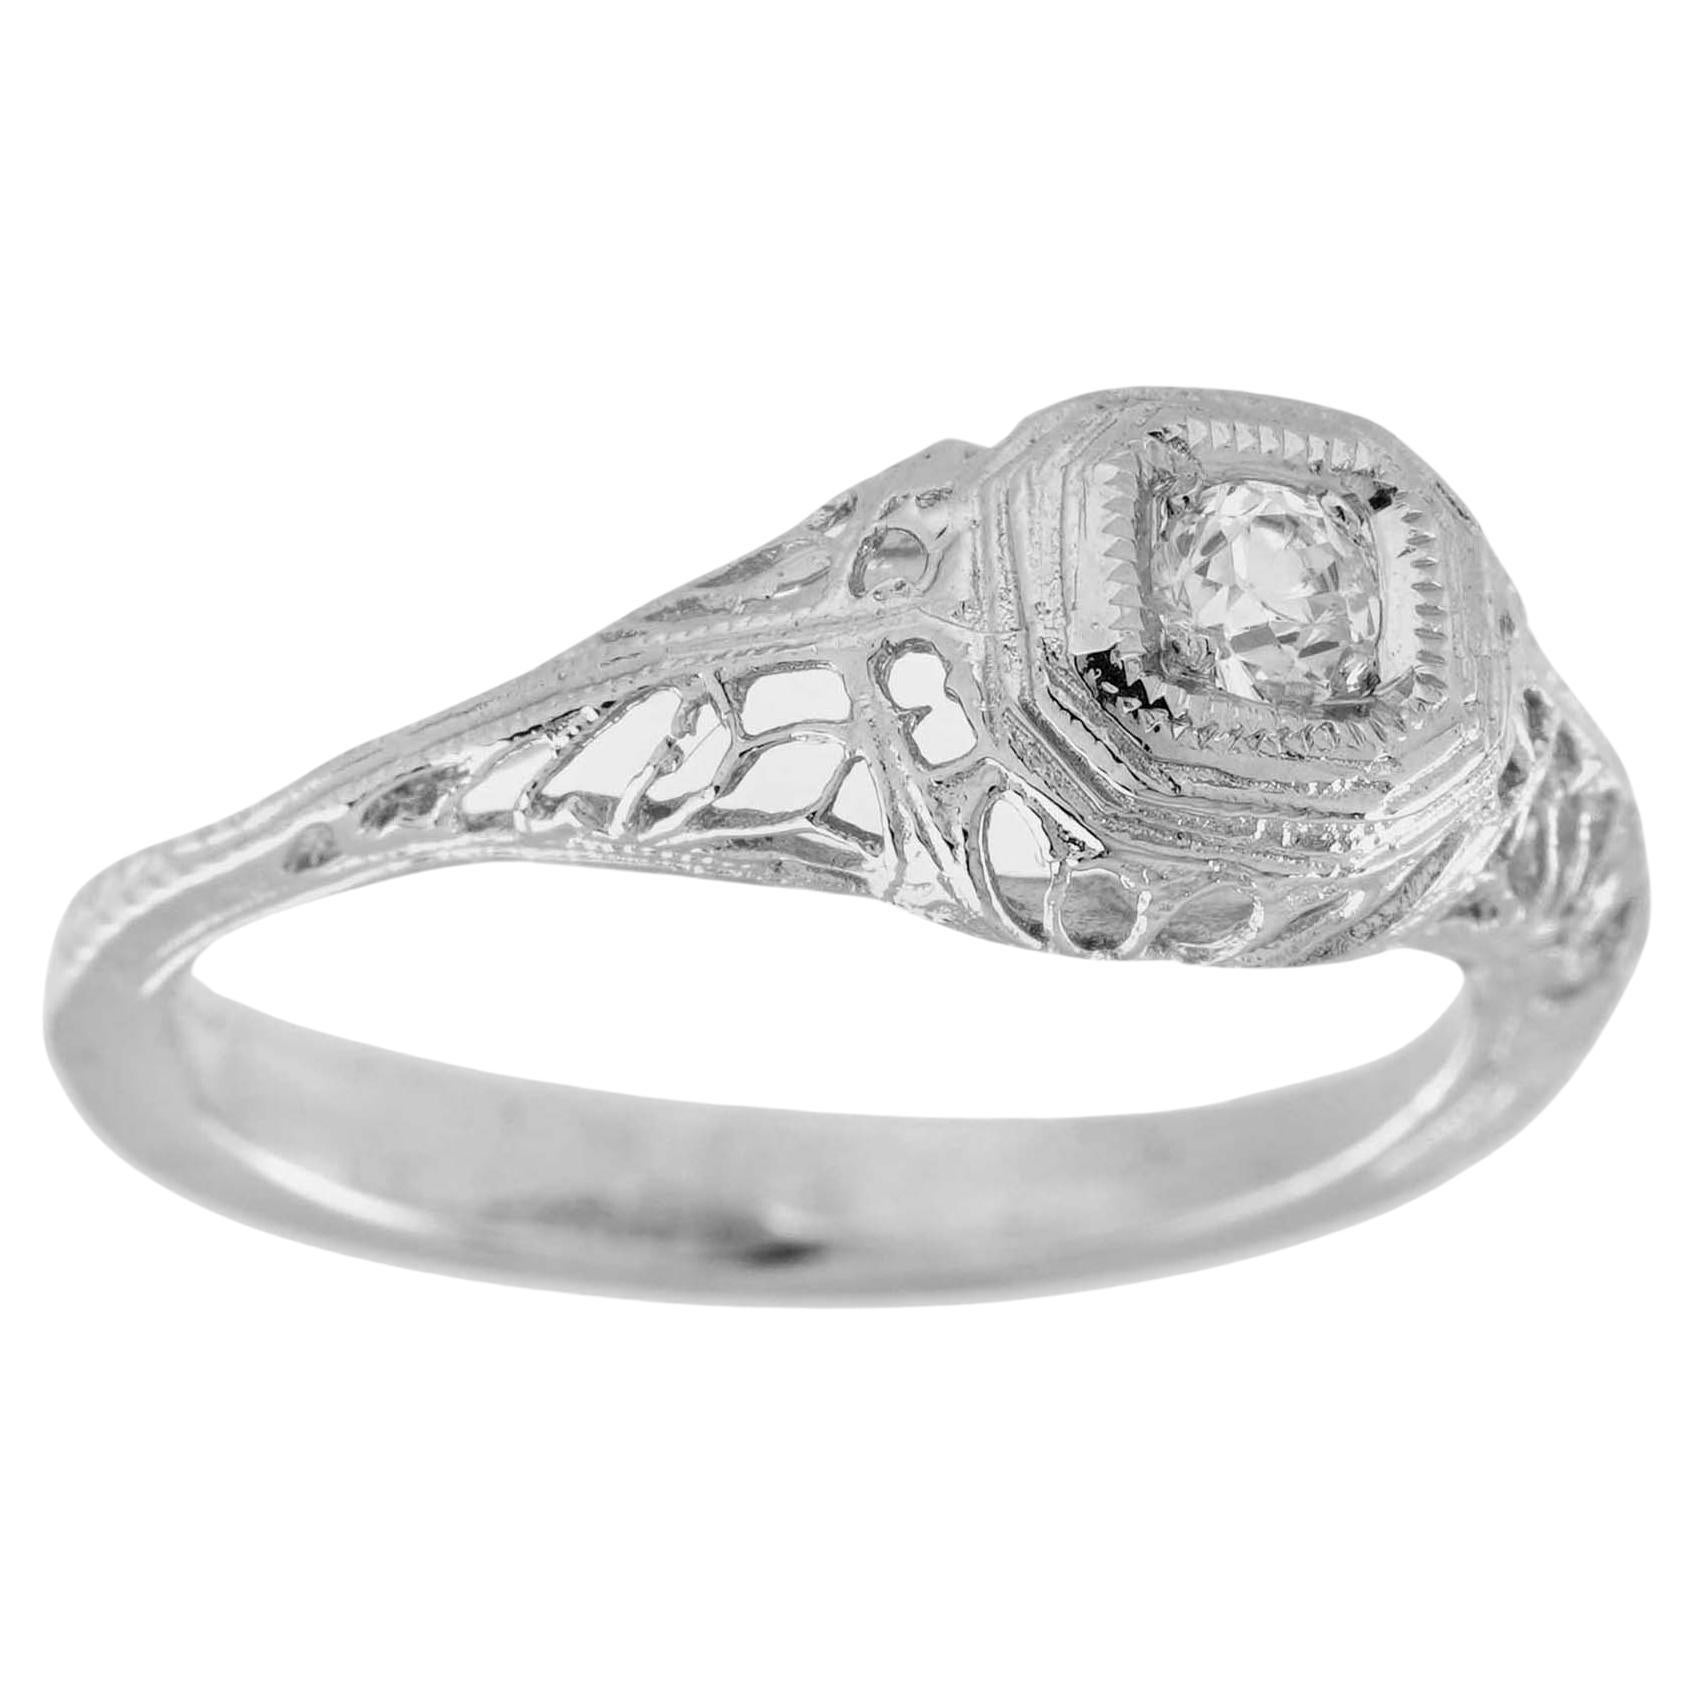 For Sale:  Natural Diamond Vintage Style Filigree Engagement Ring in 9K White Gold